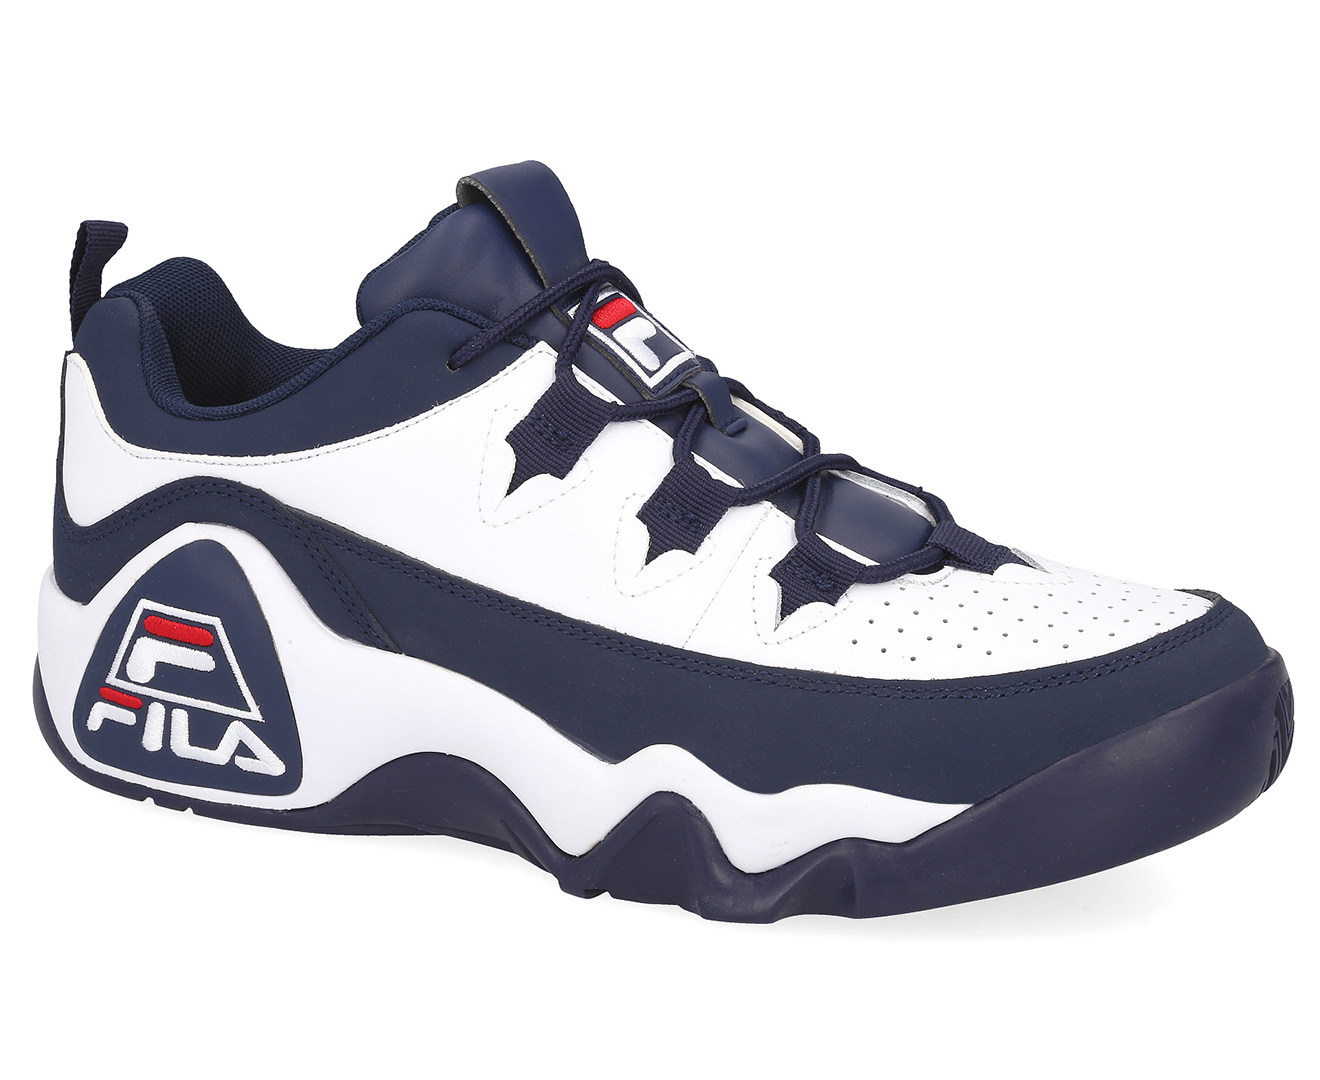 Fila Men's Grant Hill 1 Low-Top Basketball Sneakers - White/Navy/Red